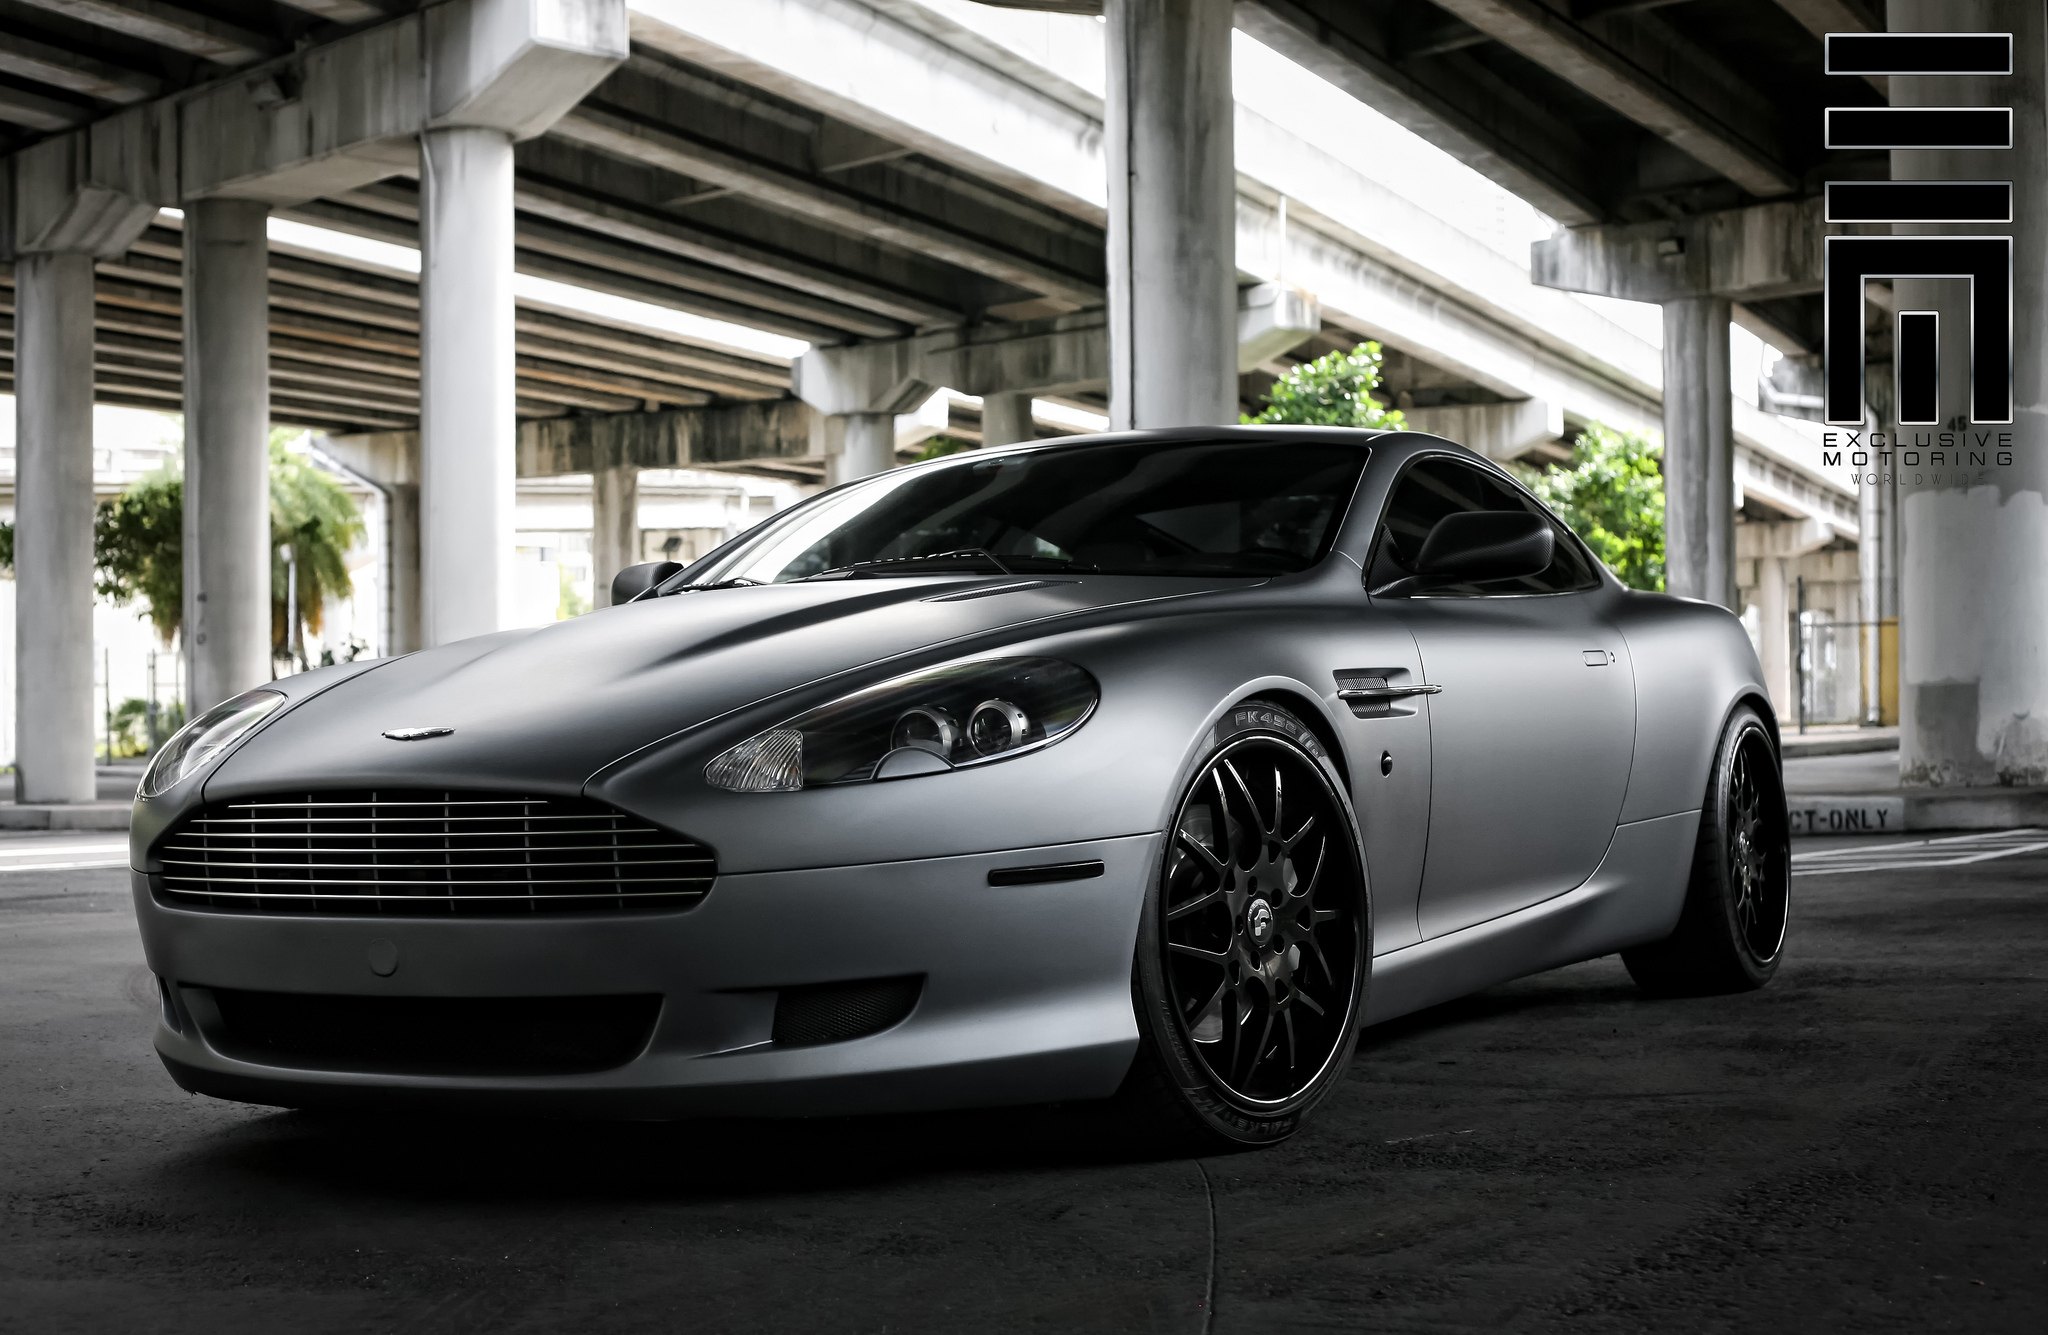 James Bond's Aston With a Street Soul - Photo by Exclusive Motoring